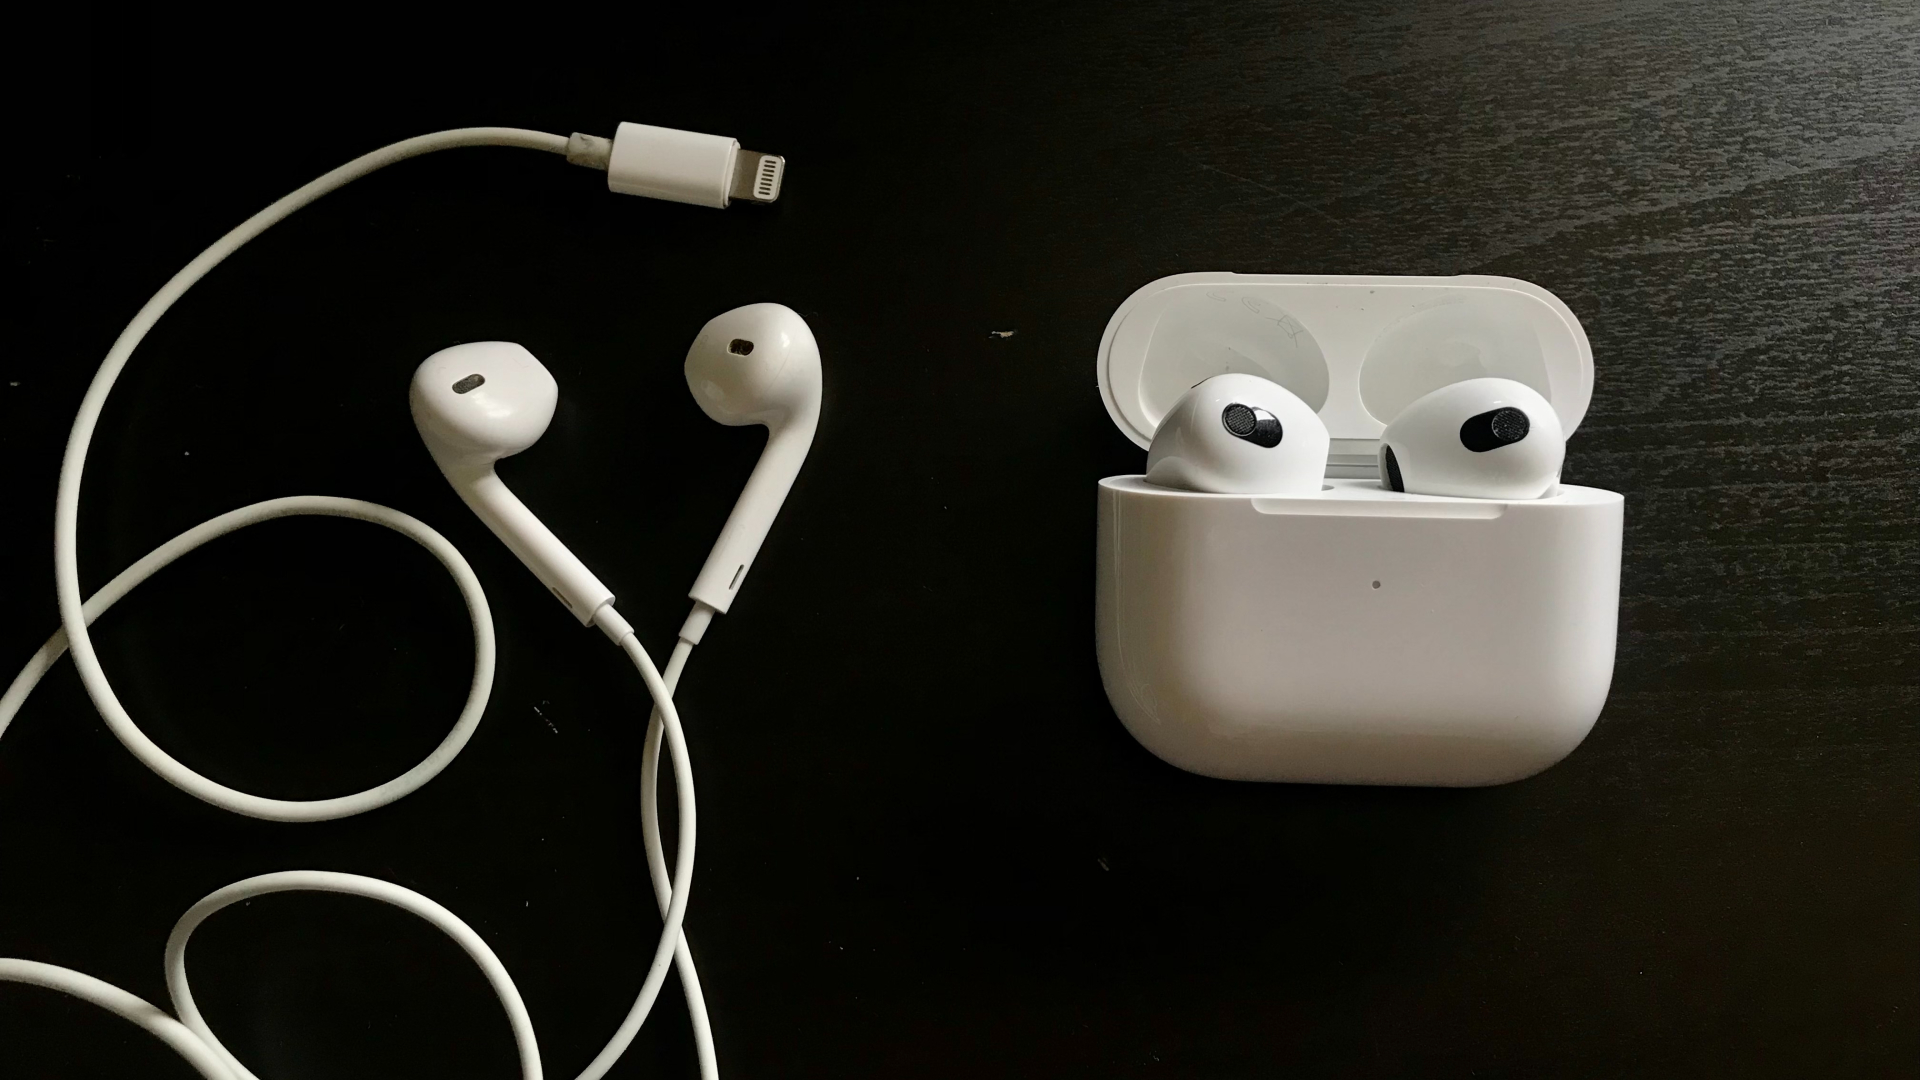 Apple Genuine EarPods with Remote and Mic for iPhone, iPod, and More